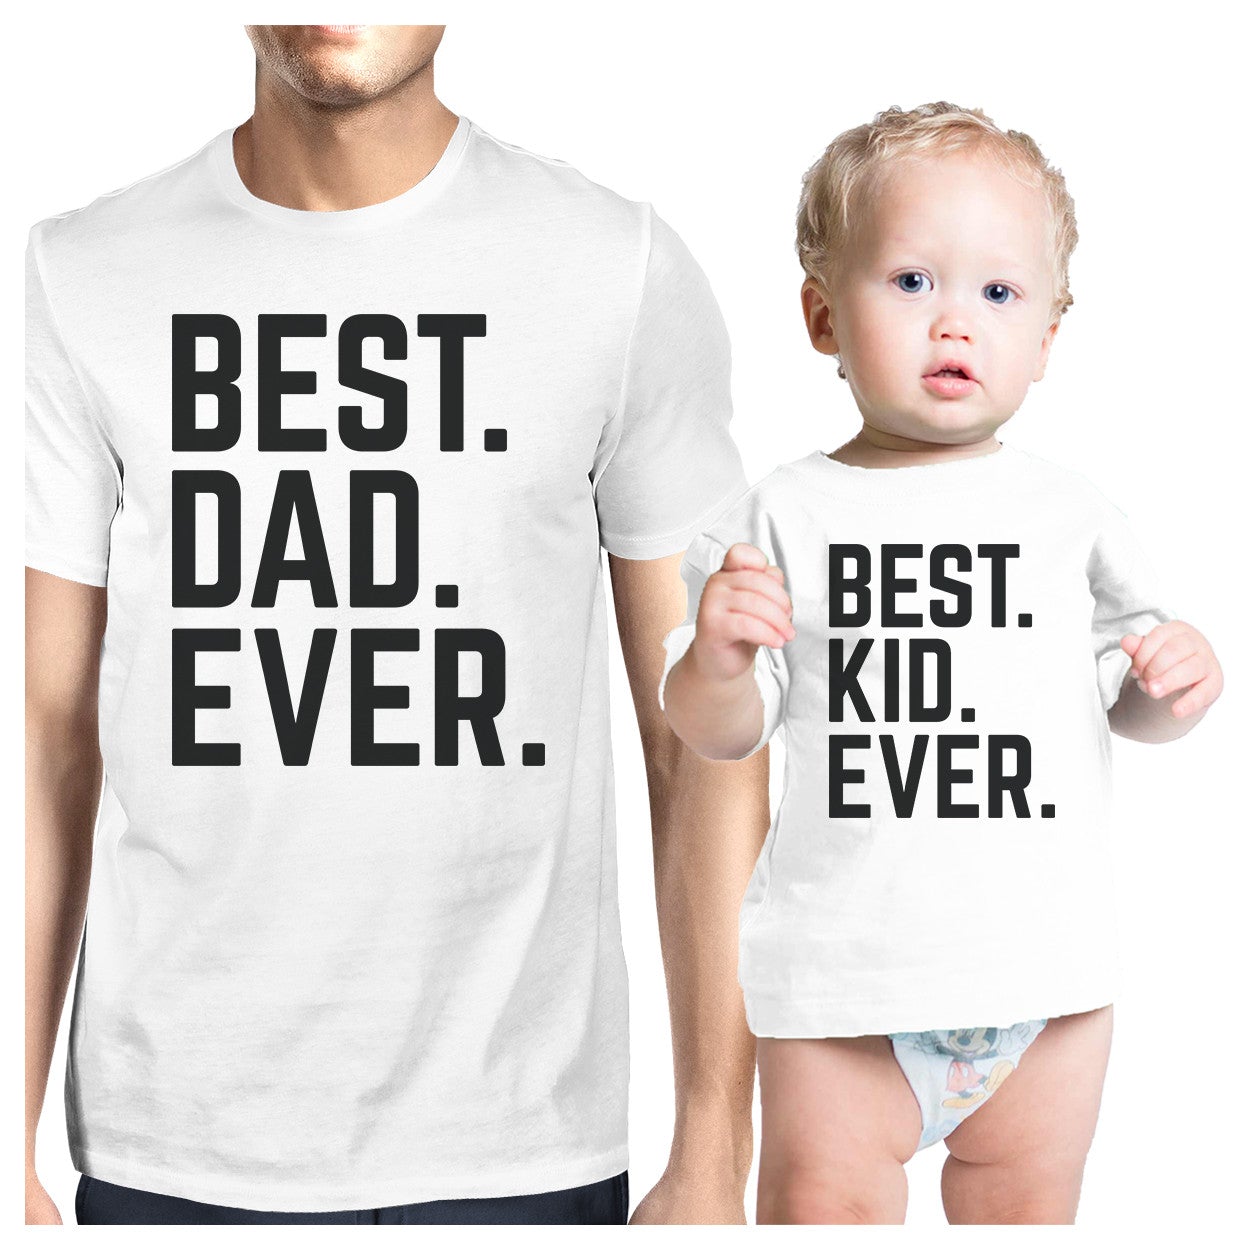 Best Dad And Kid Ever White Dad Baby Couple Tees Funny Design Top - 365 In Love